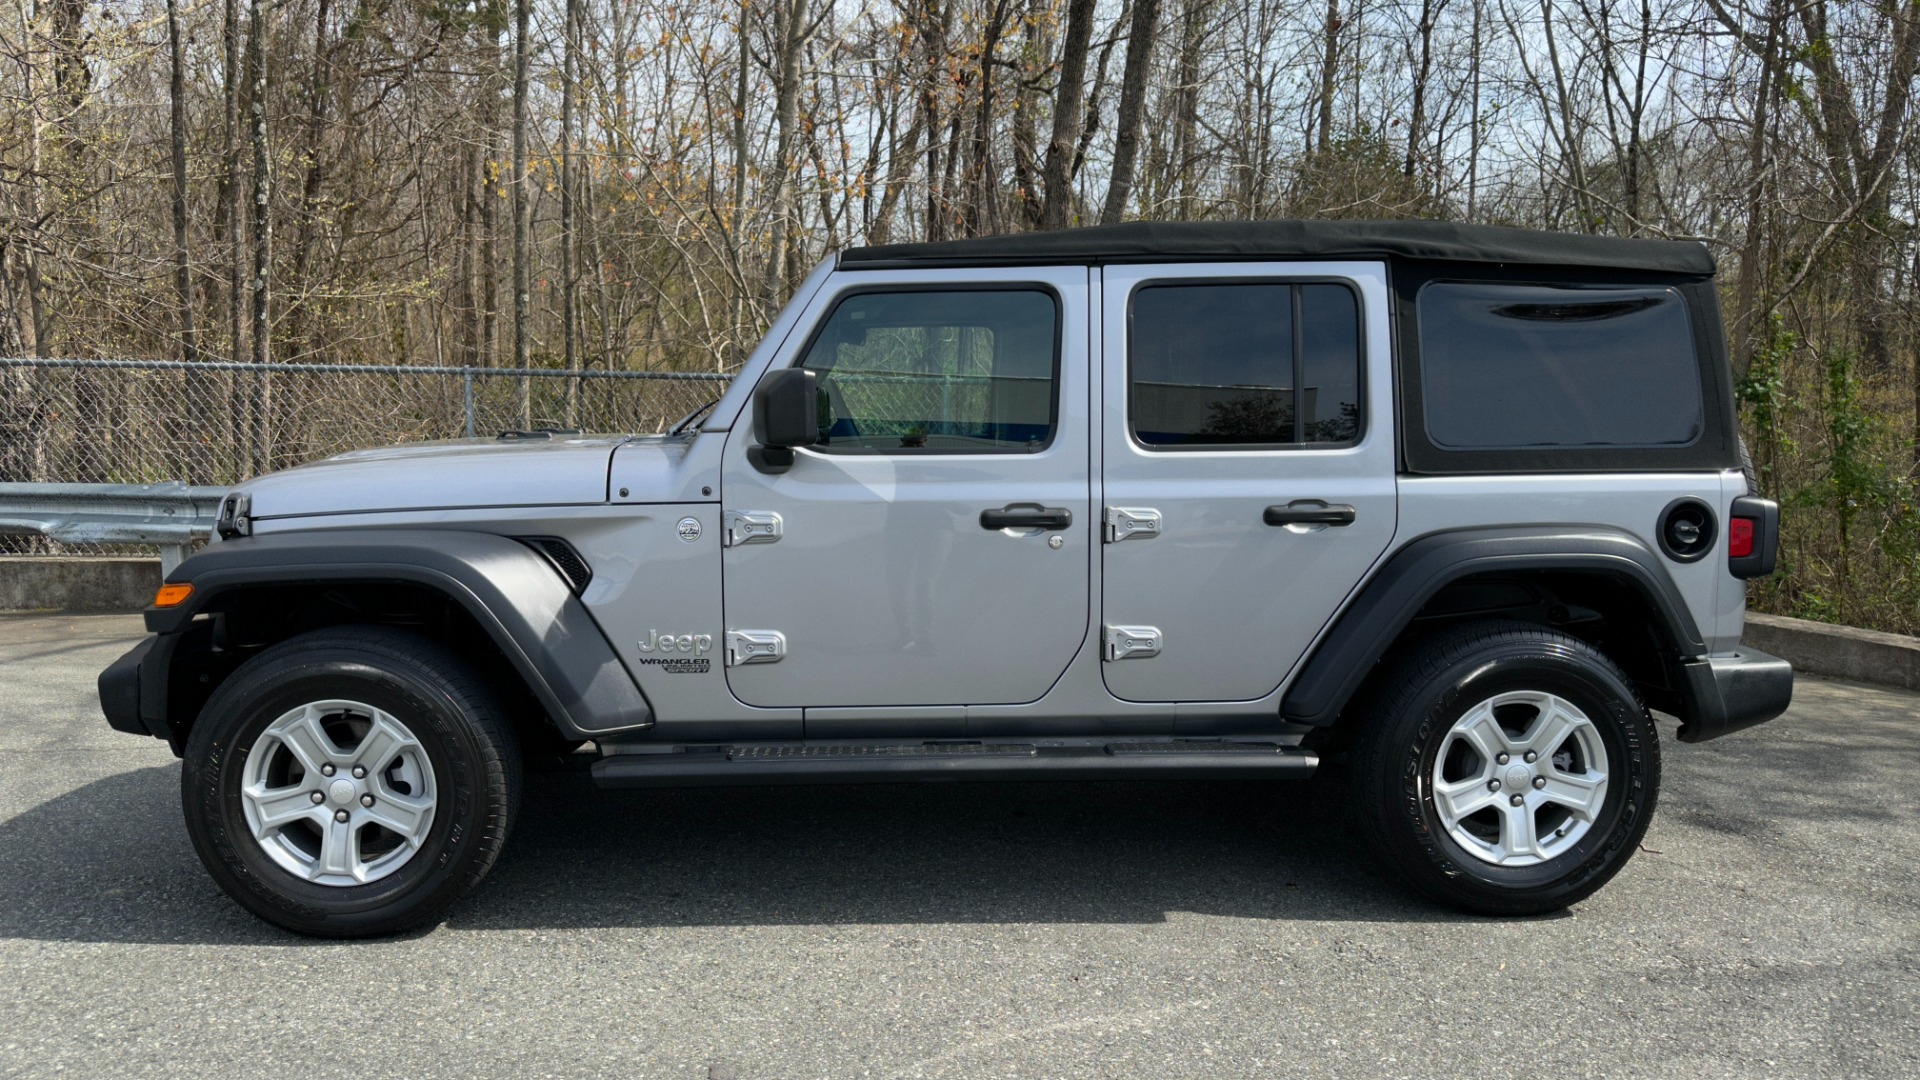 Used 2018 Jeep Wrangler Unlimited Sport S / SOFT TOP / CLOTH SEATS / SIDE STEPS / TRAILERING PACKAGE for sale $33,500 at Formula Imports in Charlotte NC 28227 3